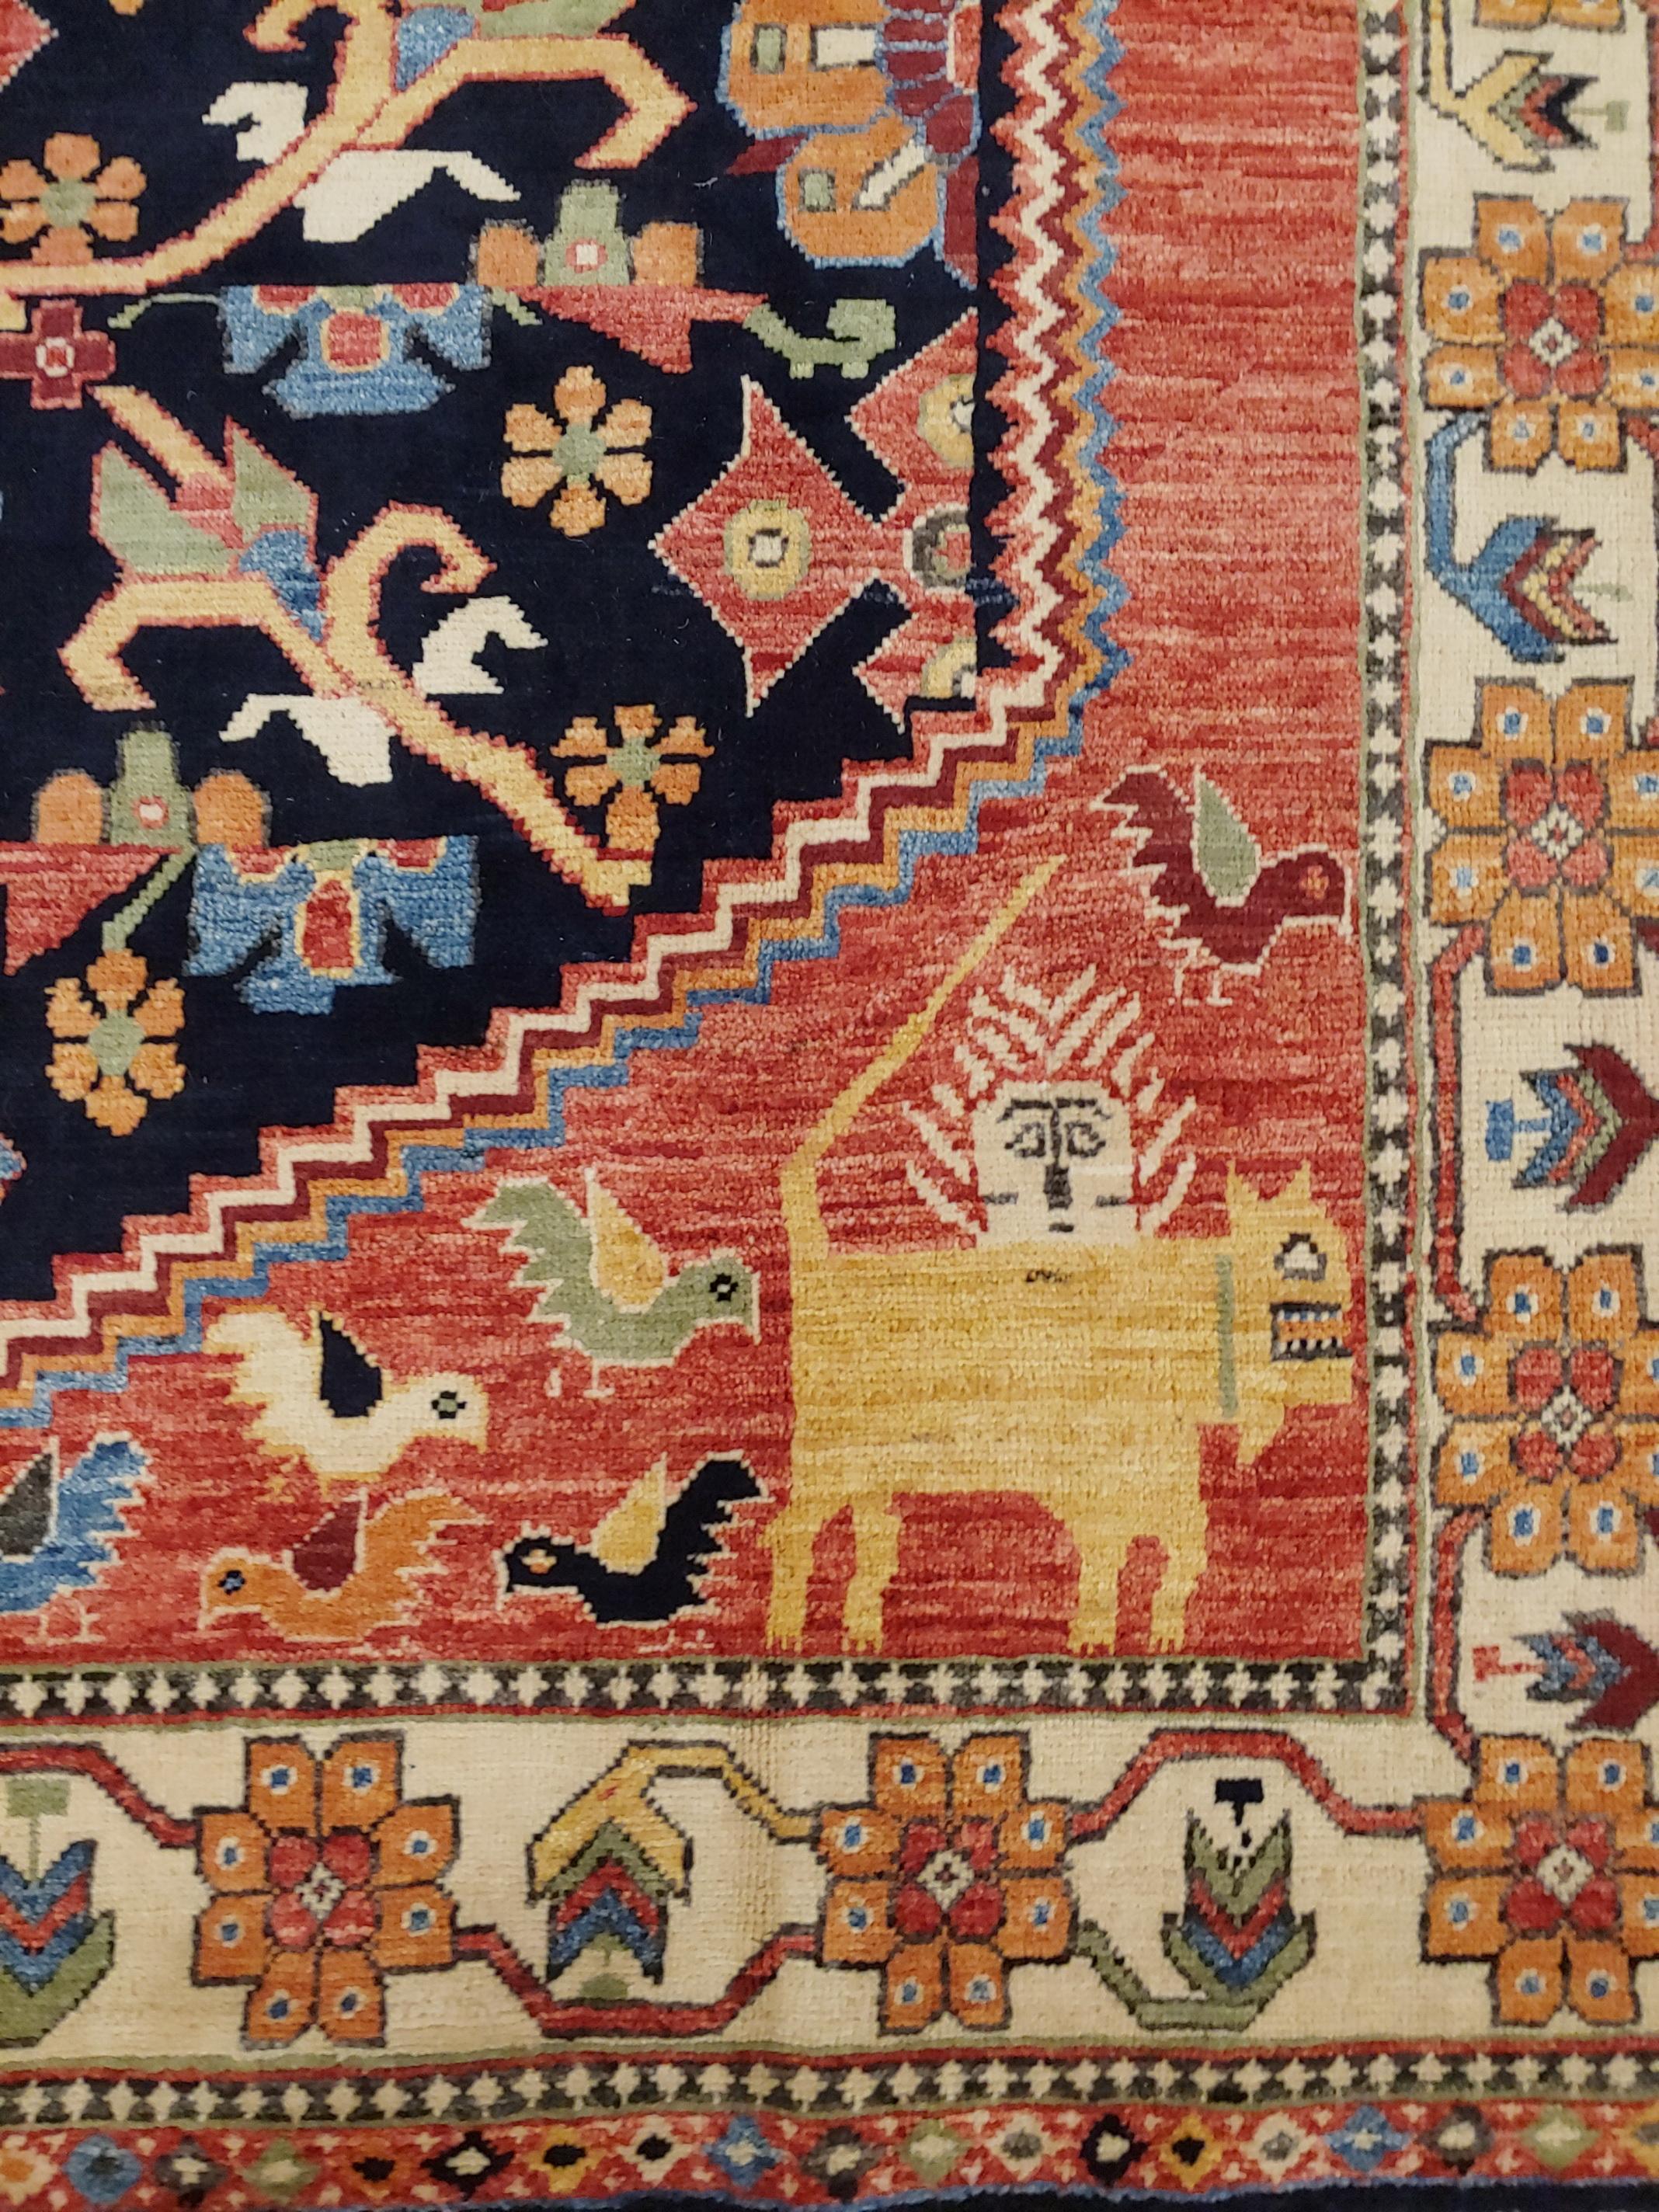 Woven New Rug From Afghanistan, Persian Qashqai Shiraz Design, Wool, Natural Dyes 4x6 For Sale